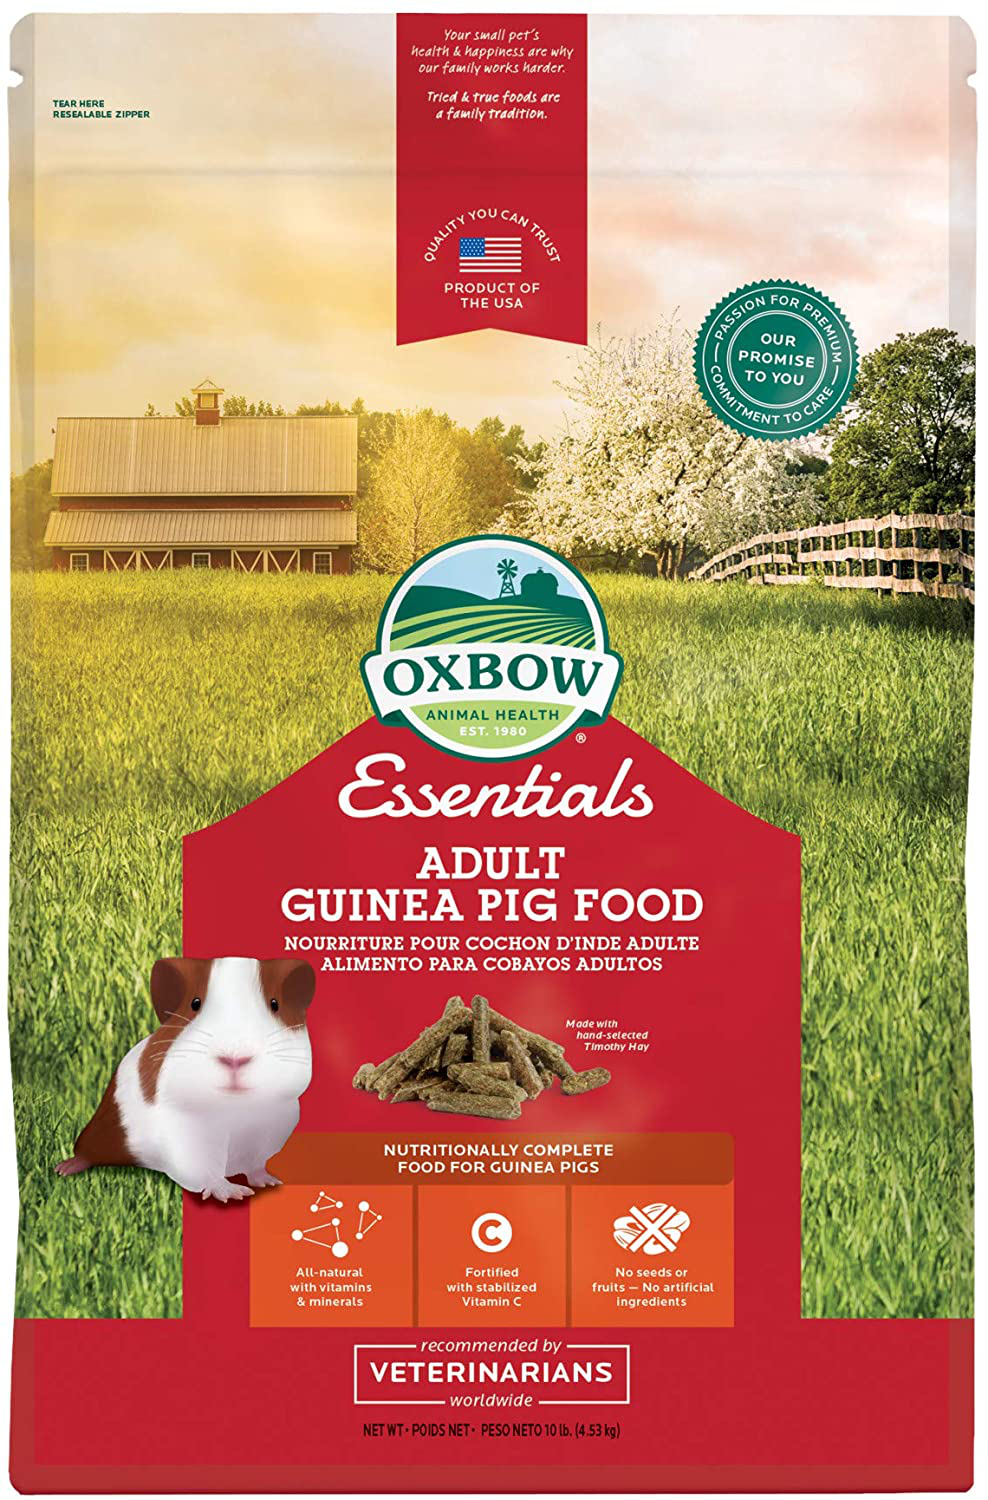 Oxbow Essentials Guinea Pig Food - All Natural Guinea Pig Pellets for Adults and Young Guinea Pigs